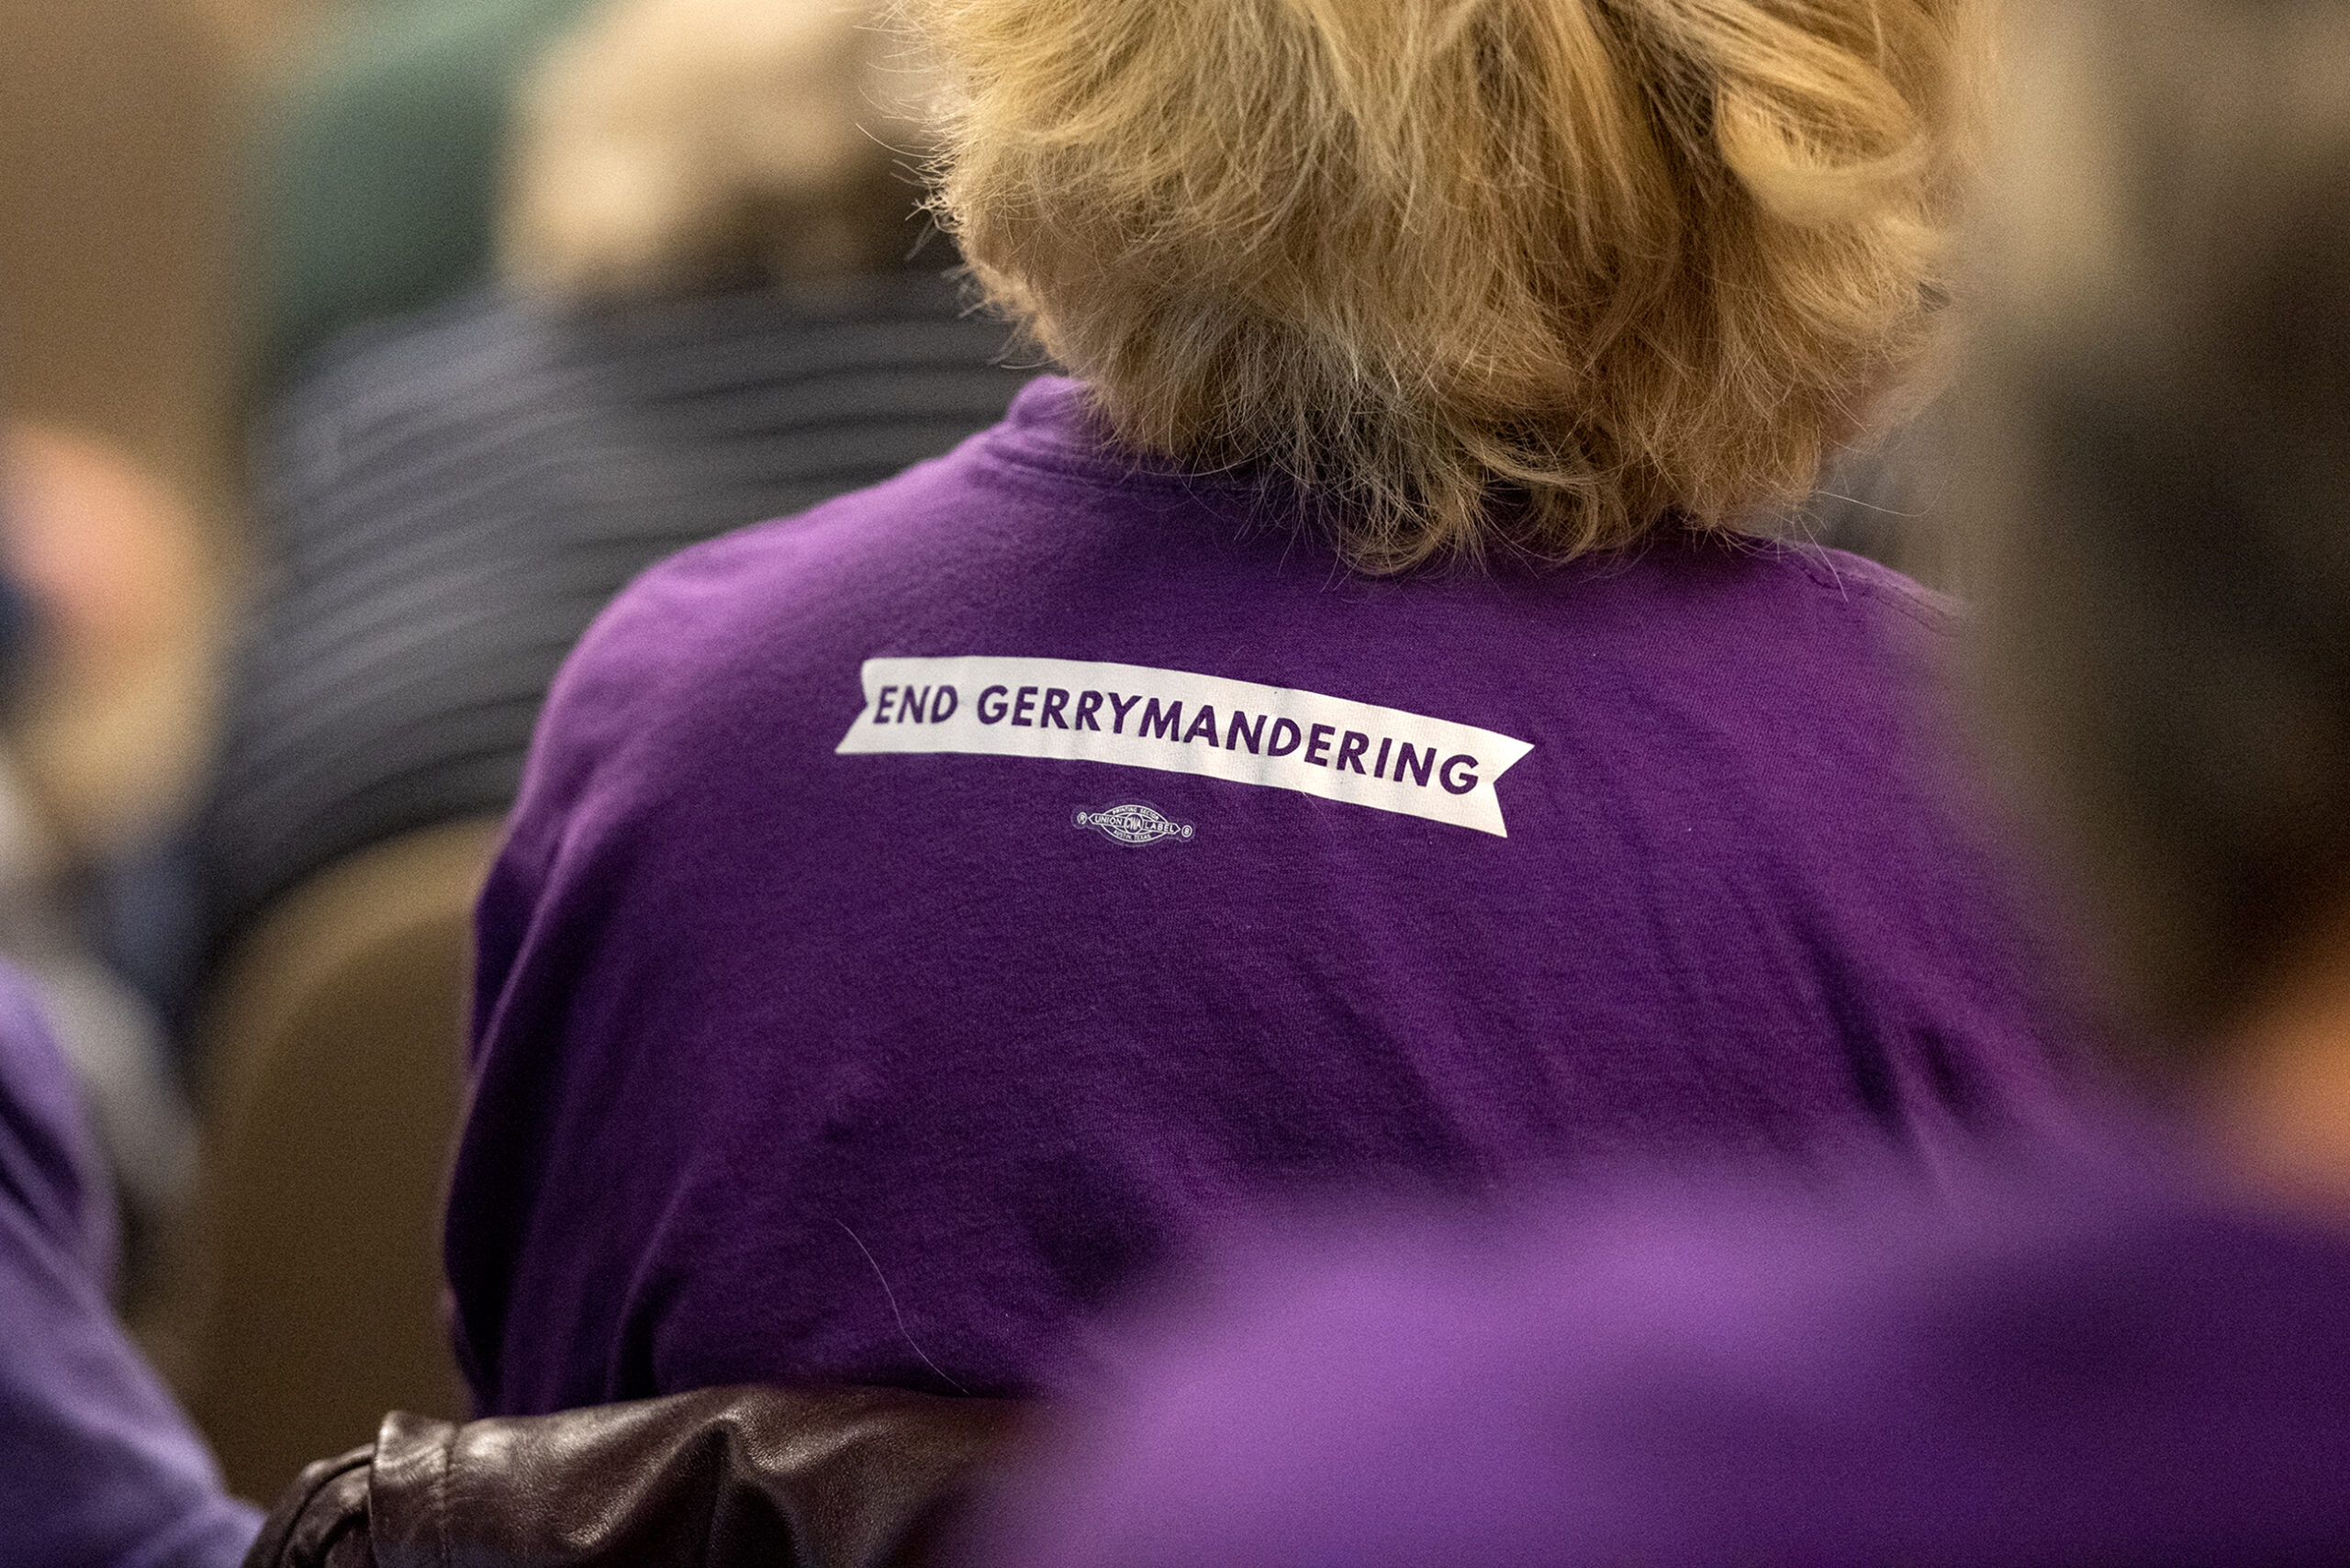 An attendee wears a purple shirt that says "end gerrymandering" on the back.